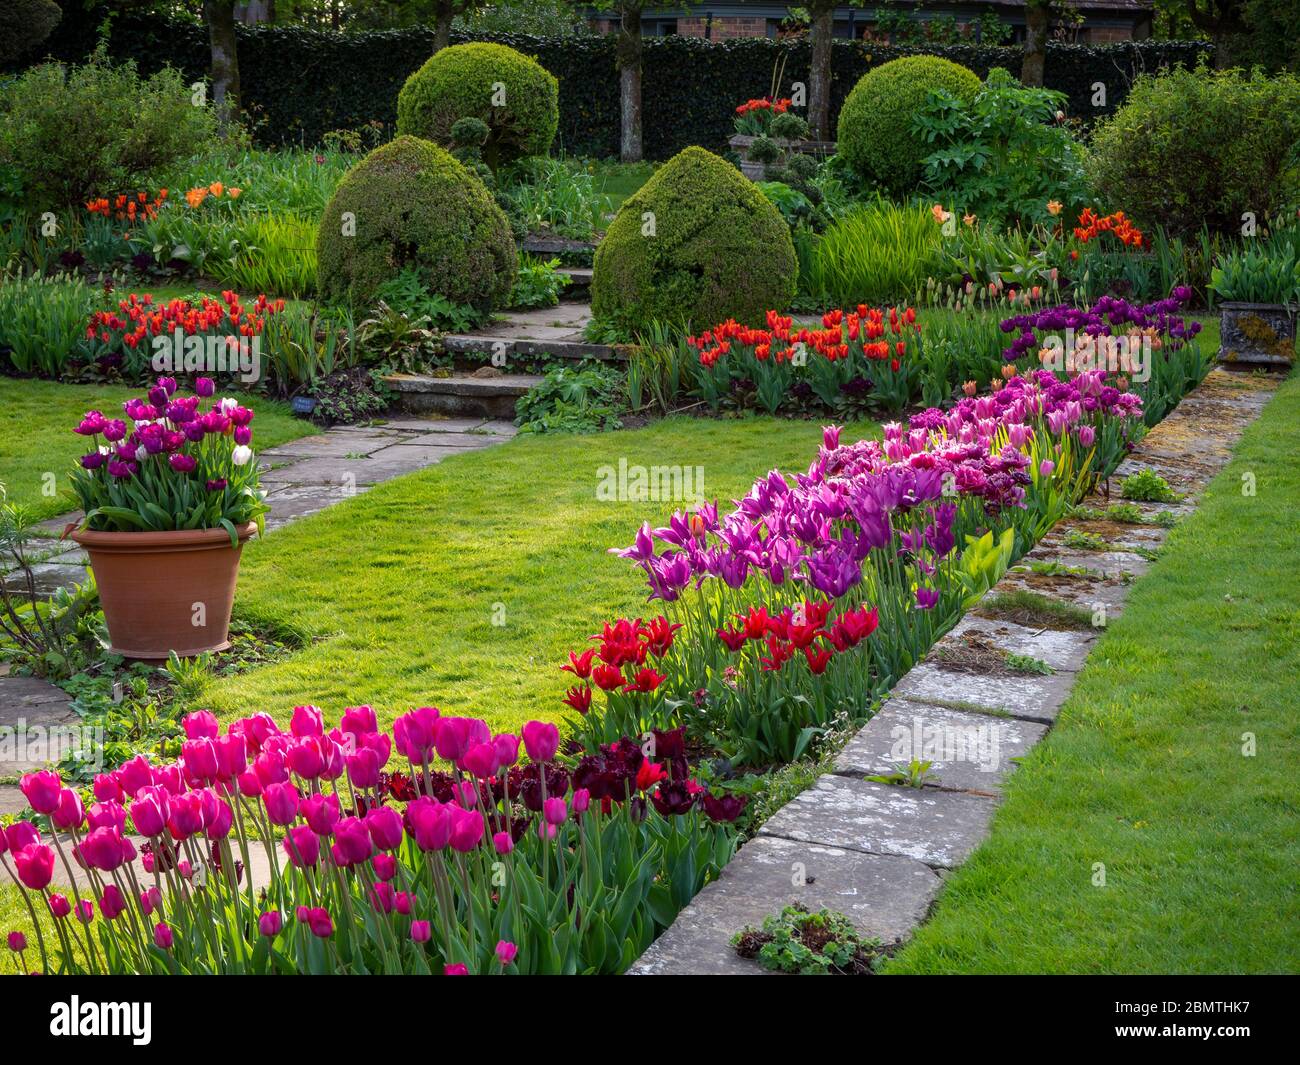 Shadow and sunshine on colourful tulip blooms in Chenies Manor sunken garden. Lawn, steps, path lead the eye along rows of pink, mauve, orange blooms. Stock Photo